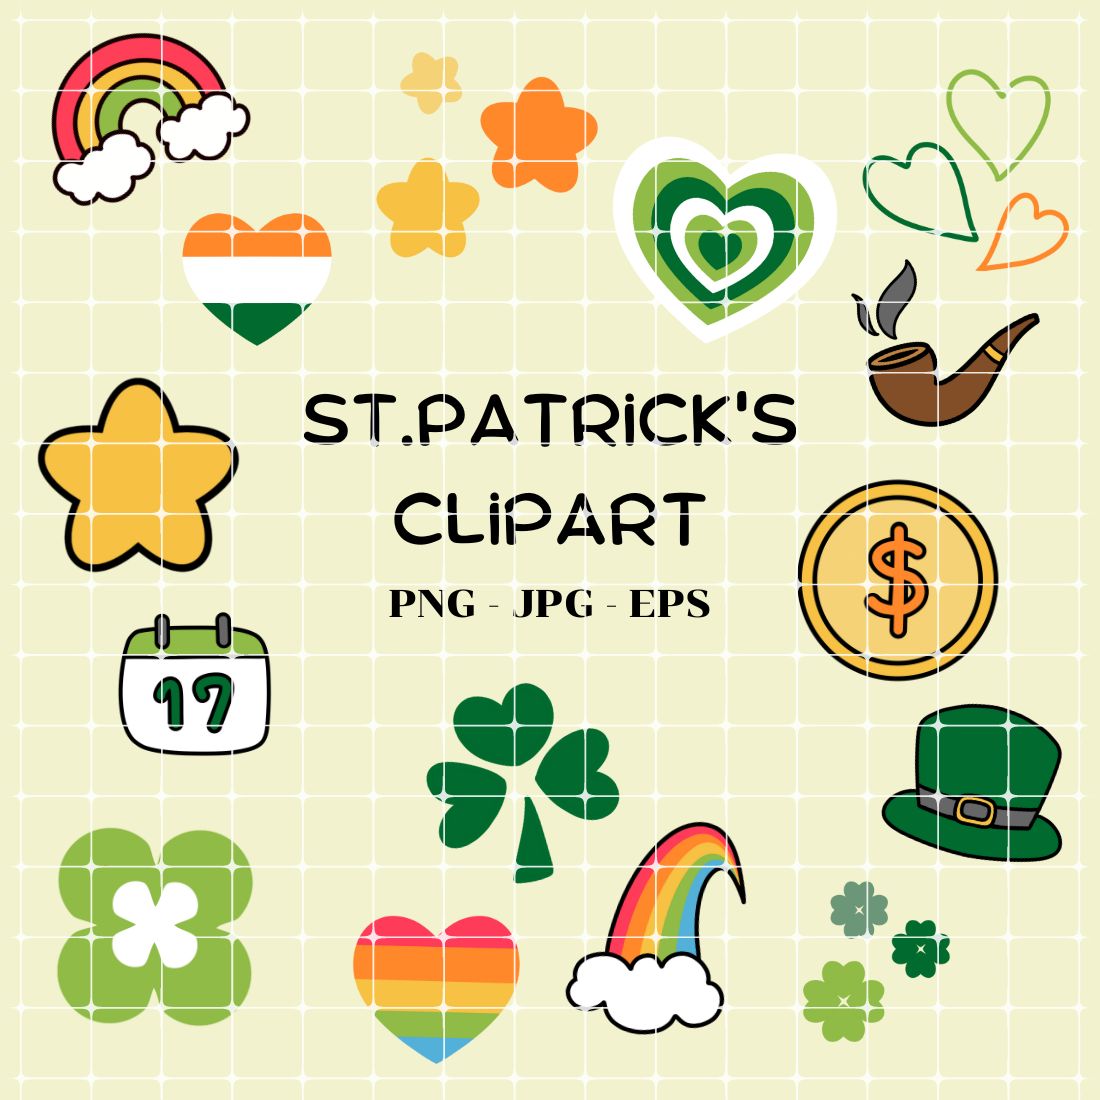 StPatrick\'s Day Hand Drawn Clipart - PNG, JPG, EPS - 300 DPI cover image.